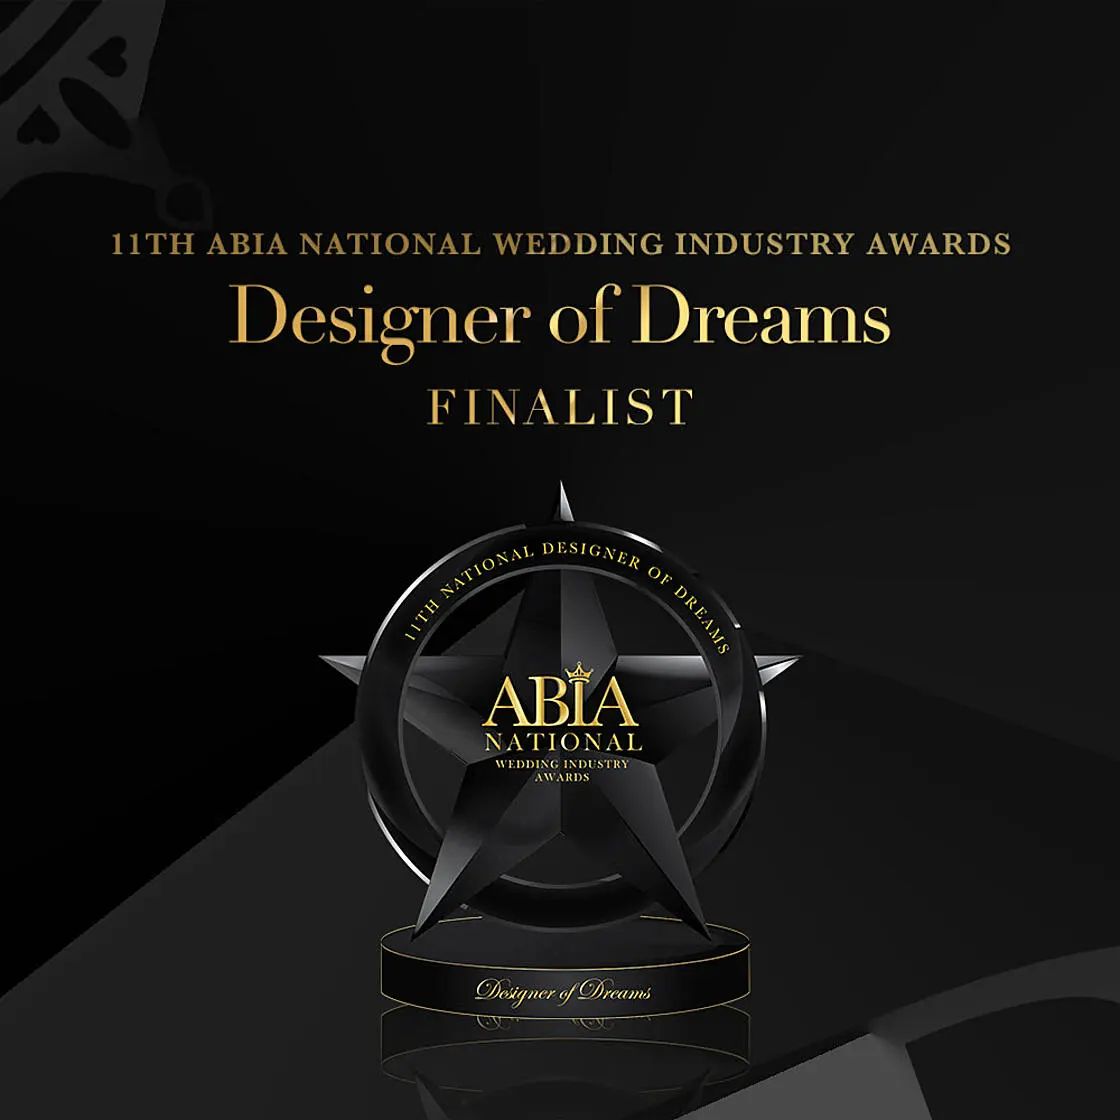 We are ecstatic and thrilled to announce that @th3rddimensionmedia is a shortlisted Finalist for the 11th ABIA National Designer of Dreams Wedding Awards 🧡🏆 To qualify, our business had to be rated & reviewed with ABIA over 4 consecutive years, achieving an average customer-rating above 95% from our own, amazing wedding clients.
Thank you, thank you, thank you!
Winners & Rankings will be announced April 20th on ABIA's Youtube Channel! 
Congratulations, and best of luck to all the finalists!
Bring on the awards! 💕 #ABIAWEDDINGAWARDS. ~ with @abiaweddings